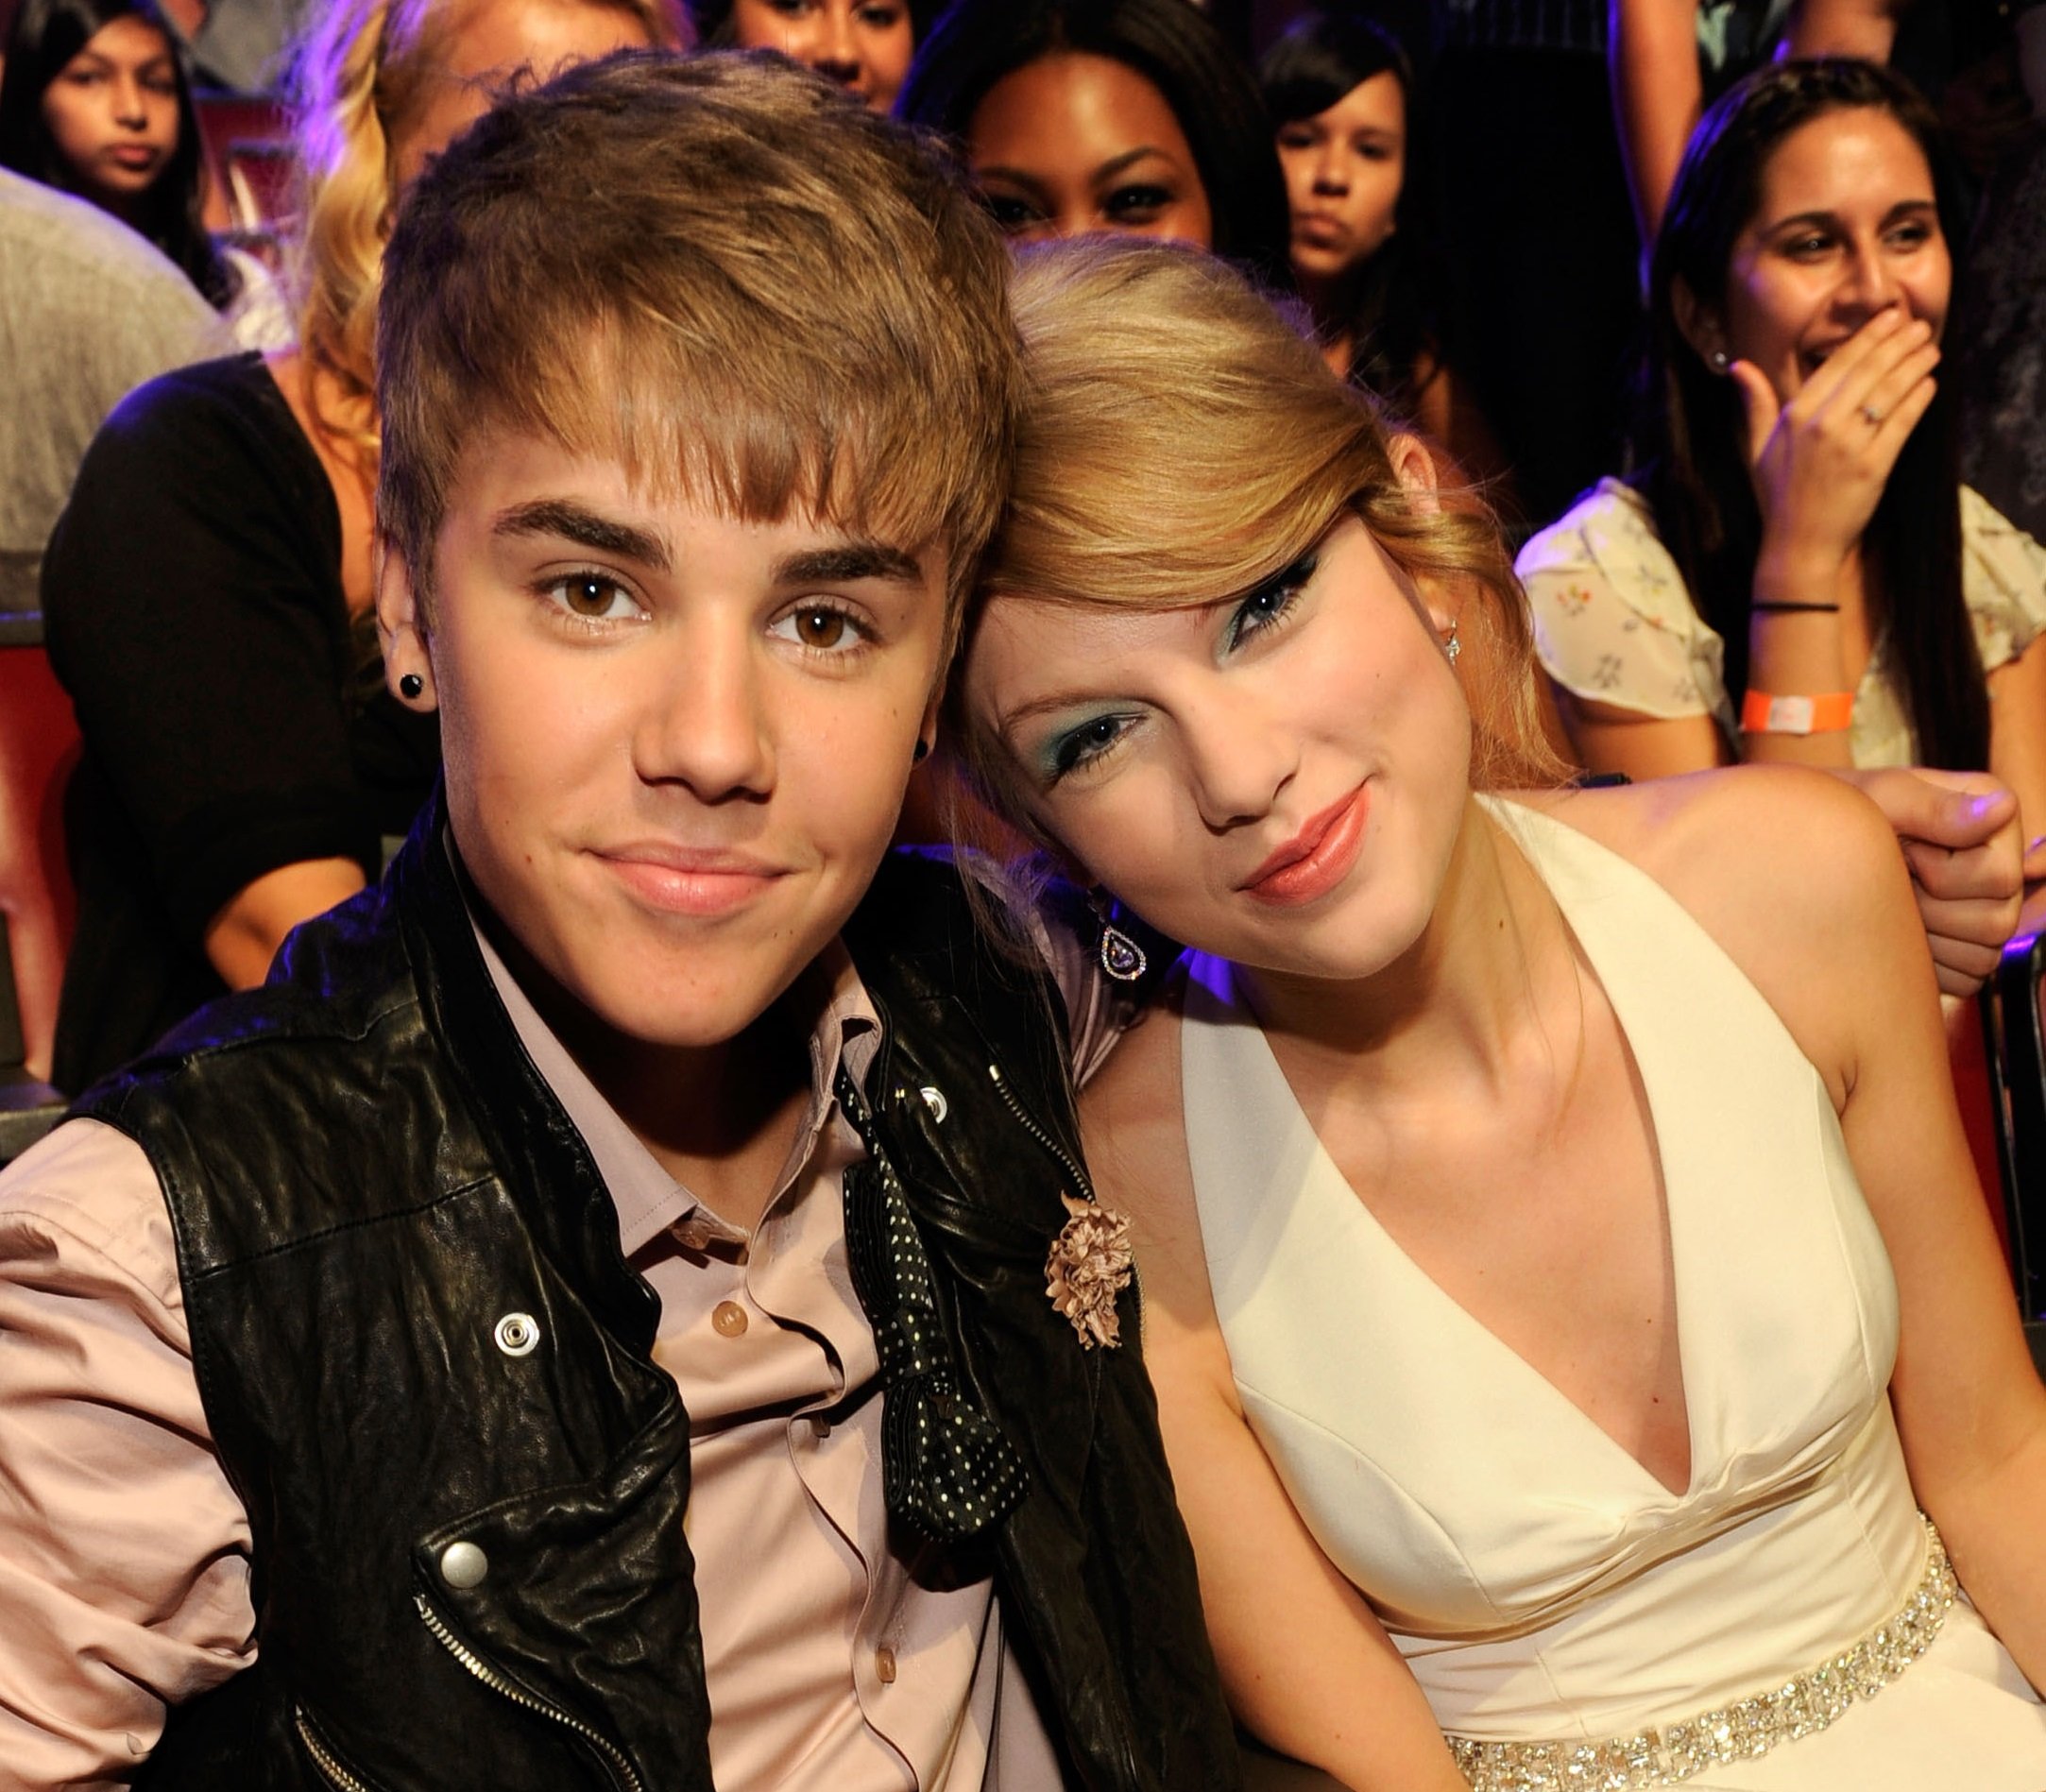 Justin Bieber and Taylor Swift attend the 2011 Teen Choice Awards at on August 7, 2011 in Universal City, California.